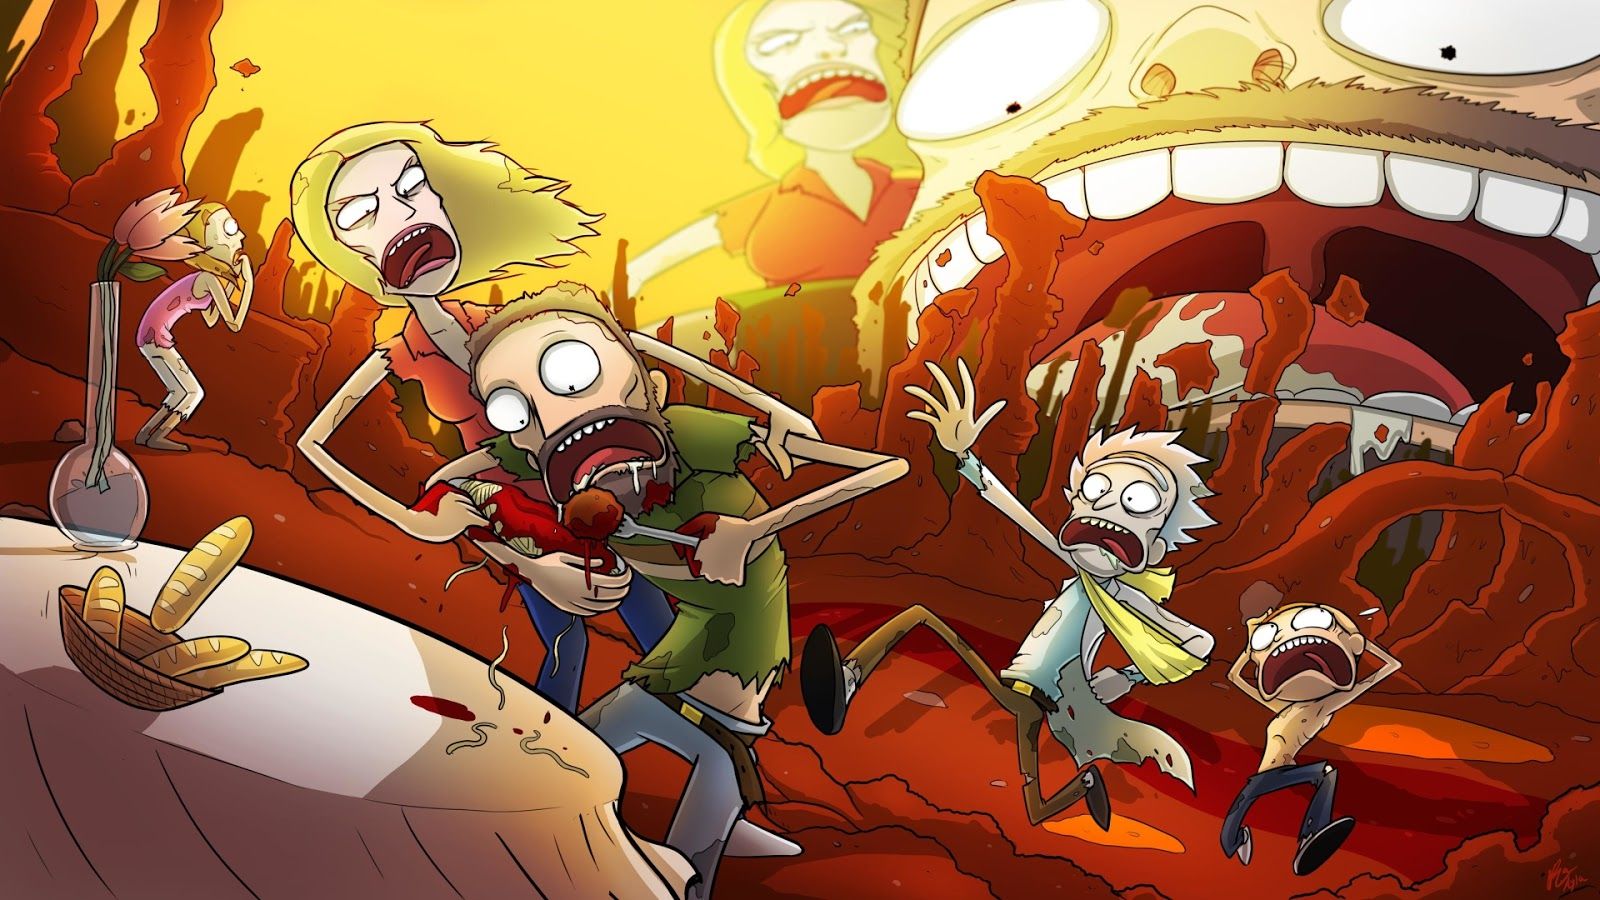 Rick And Morty 2019 Art Wallpapers